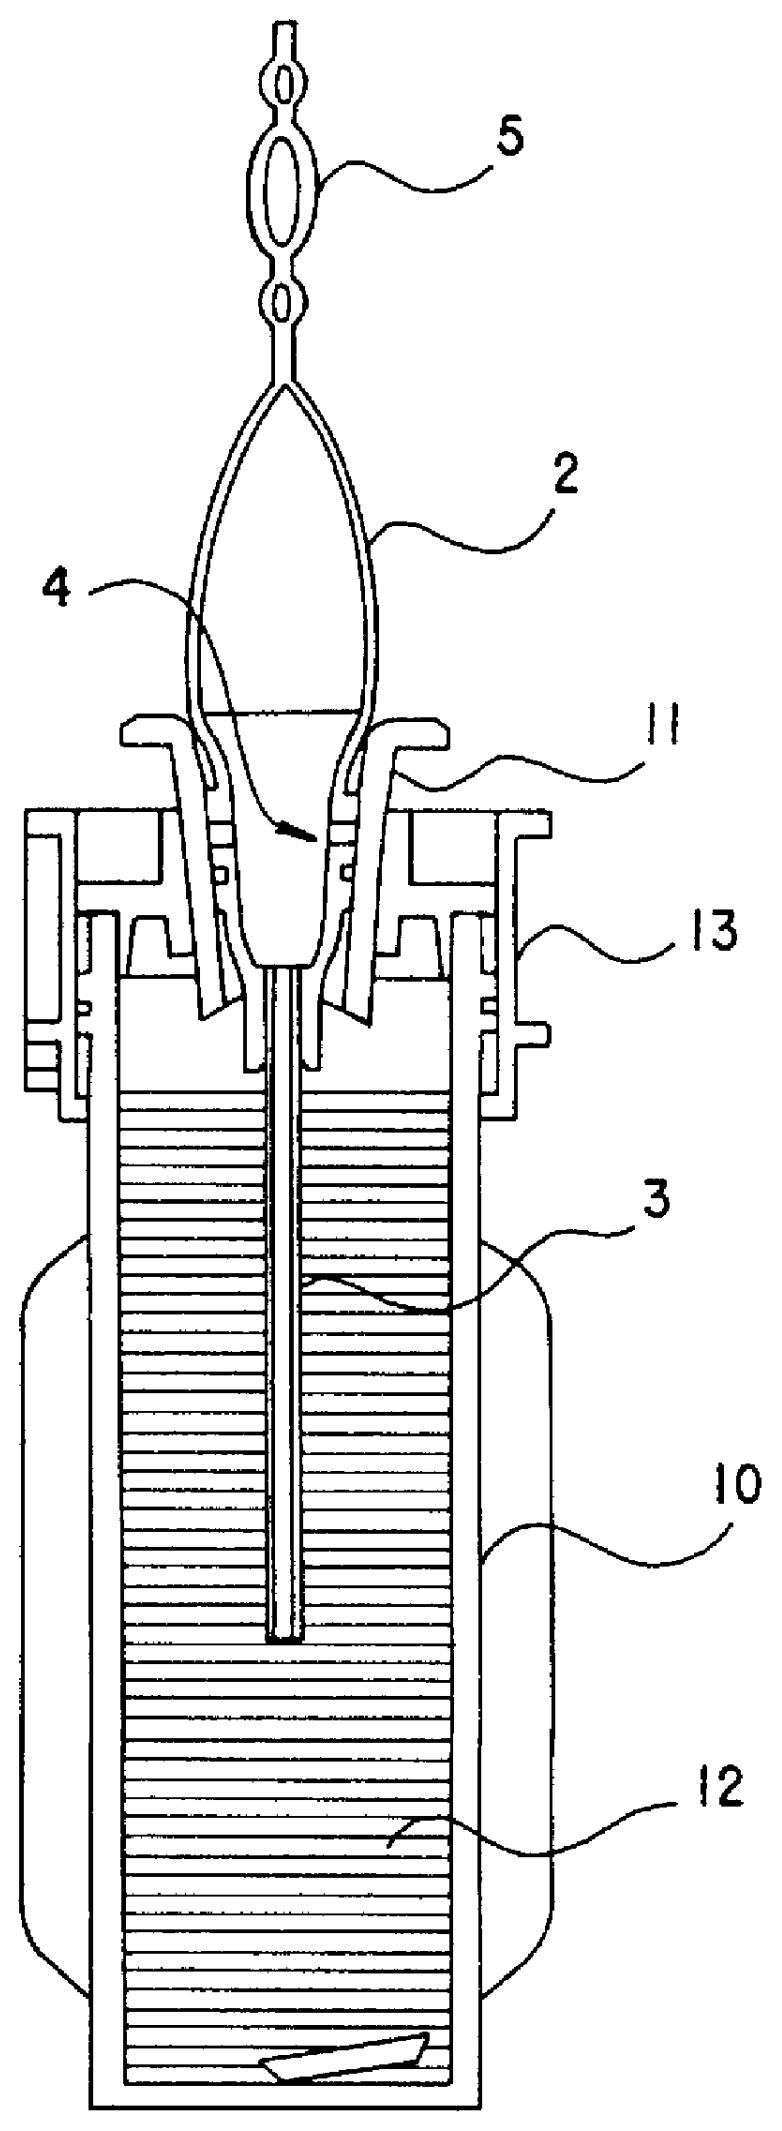 Dispensing device for dispensing small quantities of fluid